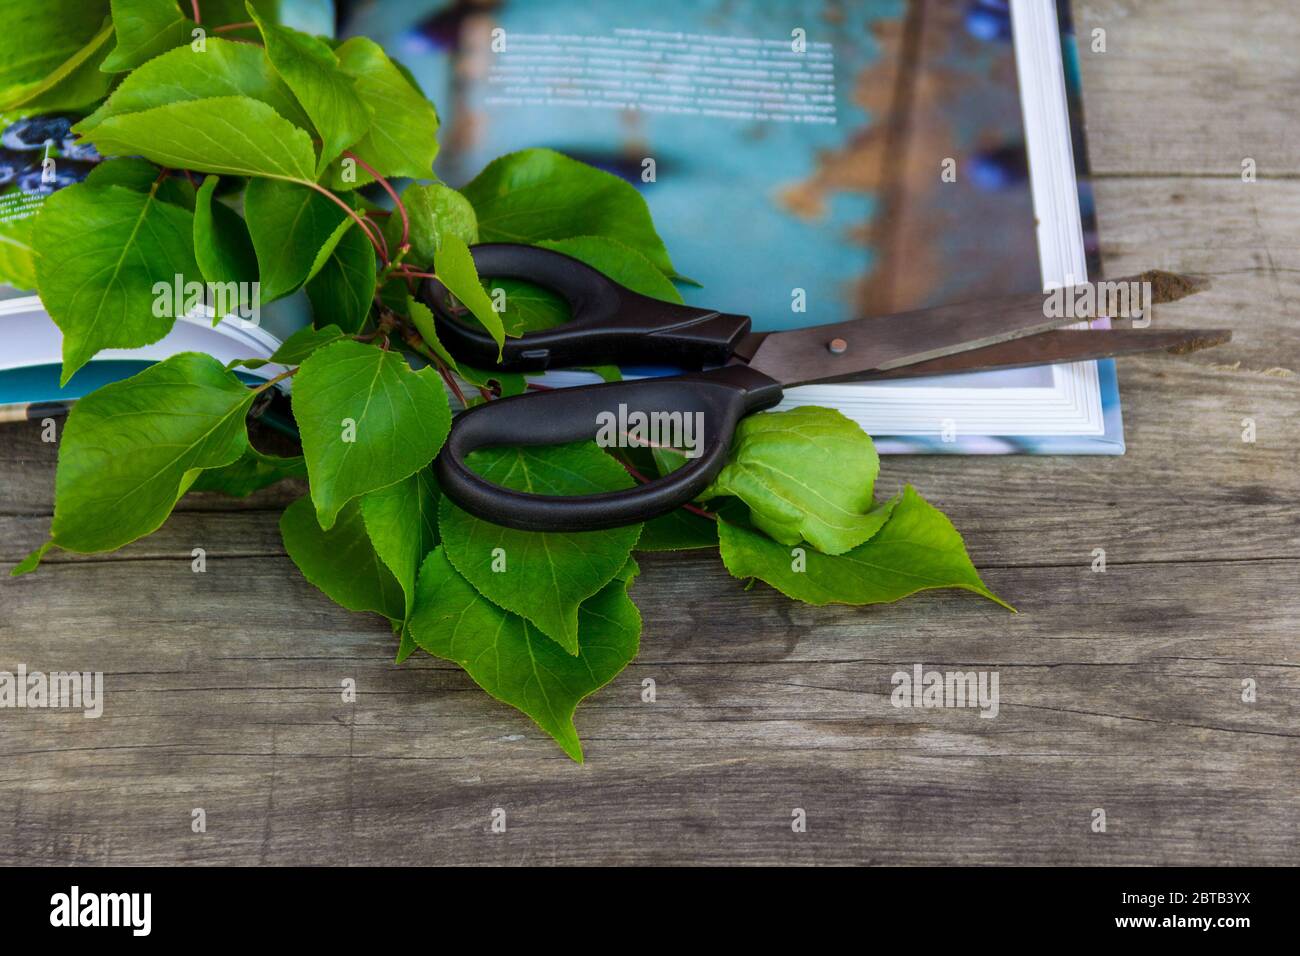 Gardening scissors, book and green branch on rustic background. Gardening time. Stock Photo